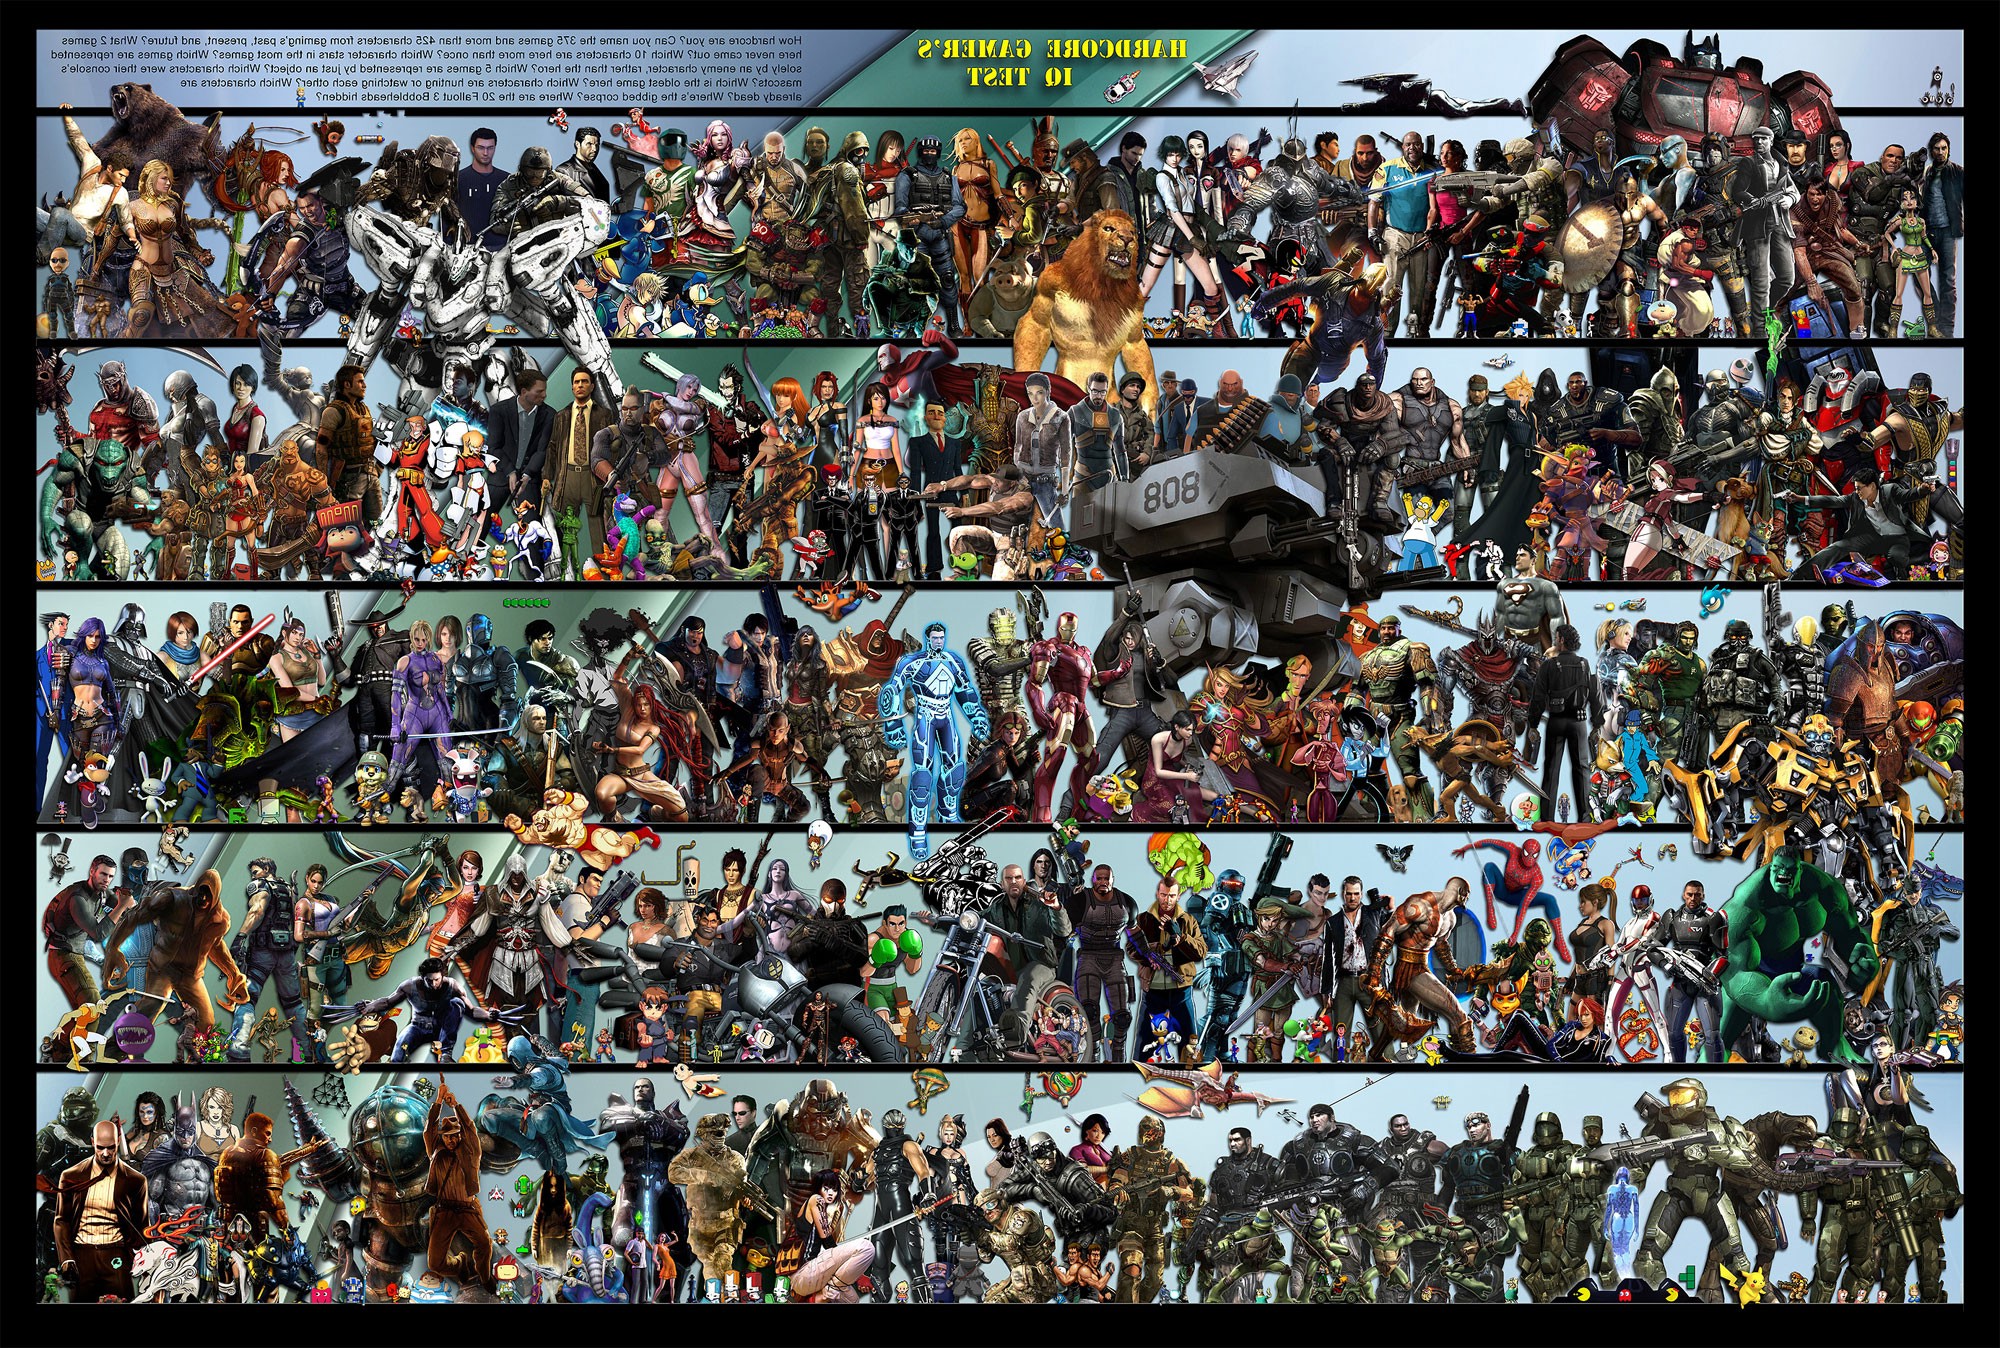 Devil May Cry, The Simpsons, Overlord, The Legend Of Zelda, Halo, Ryu (Street Fighter), Crysis, Video Games, Borderlands Wallpaper